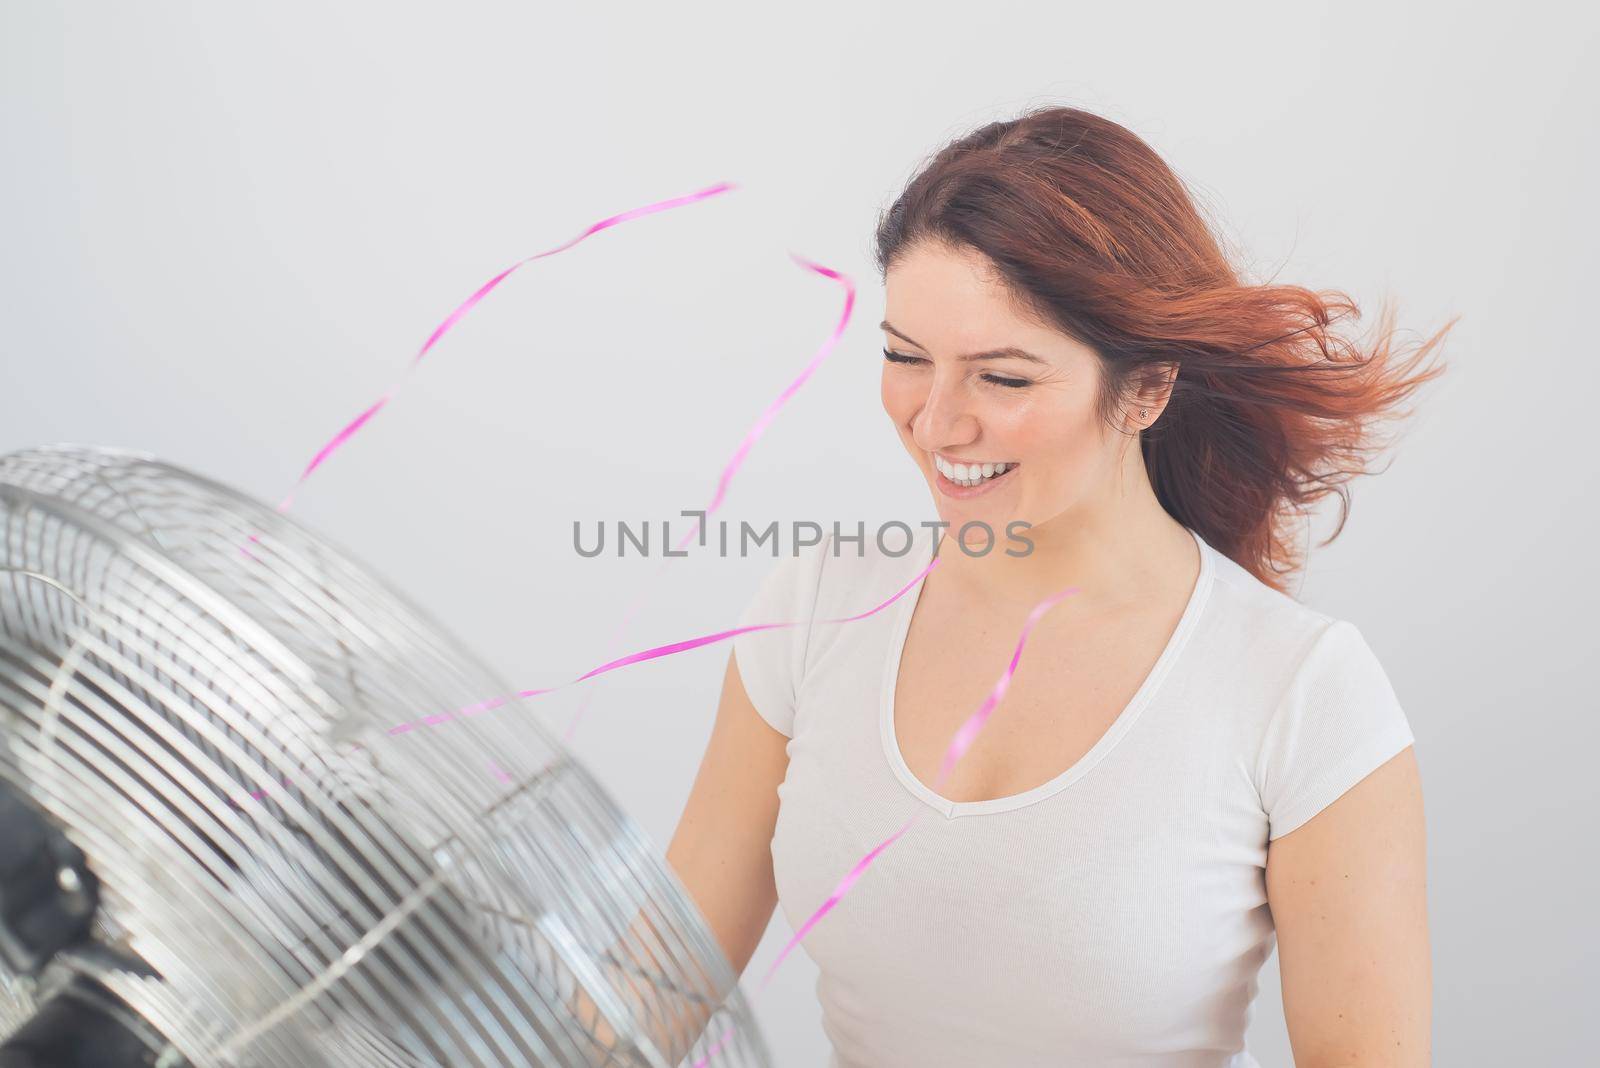 Joyful caucasian woman enjoying the wind blowing from an electric fan on a white background. by mrwed54